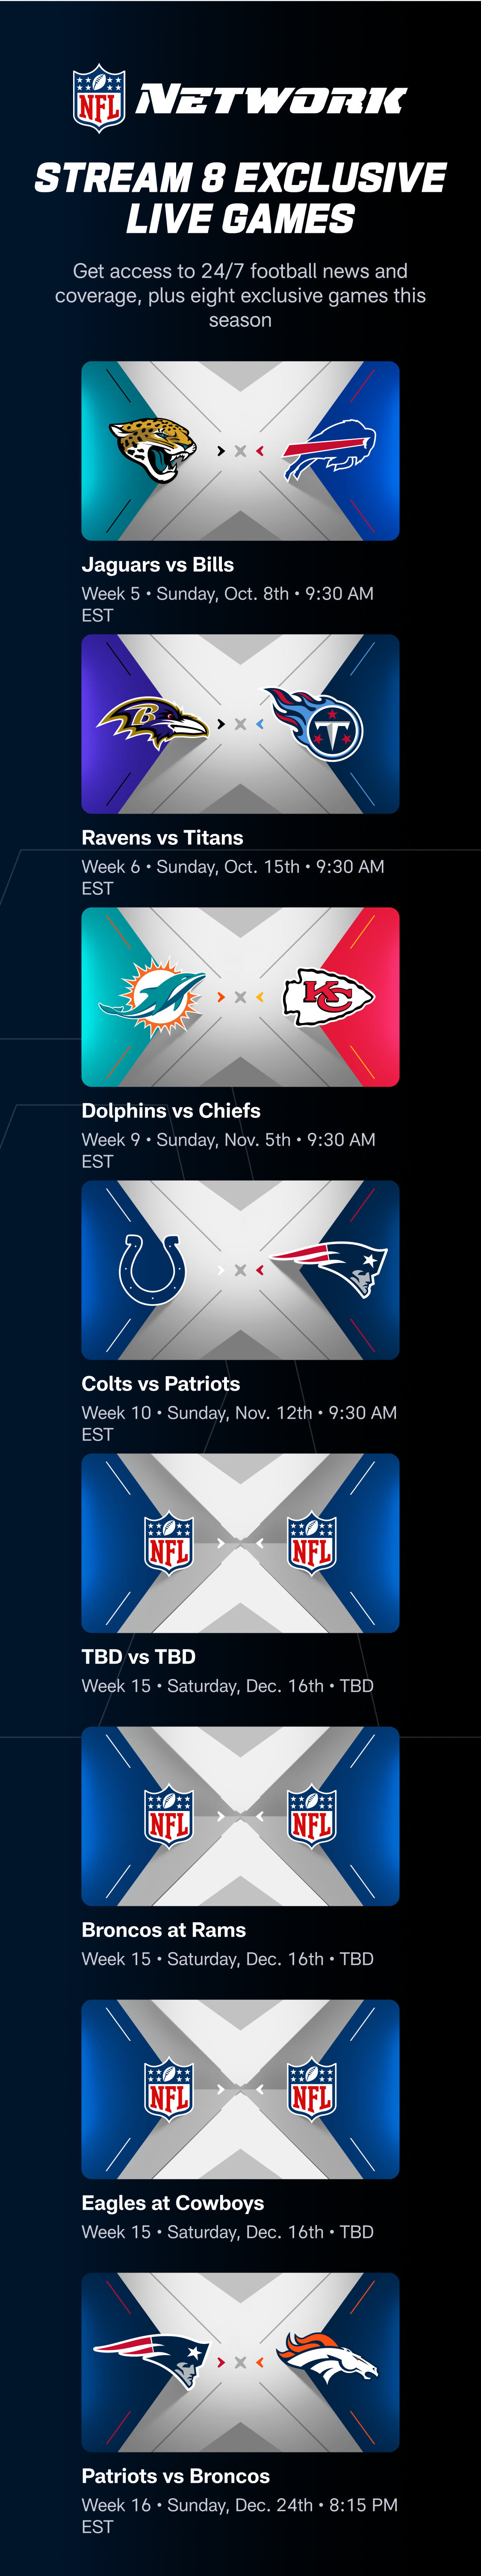 local nfl games today